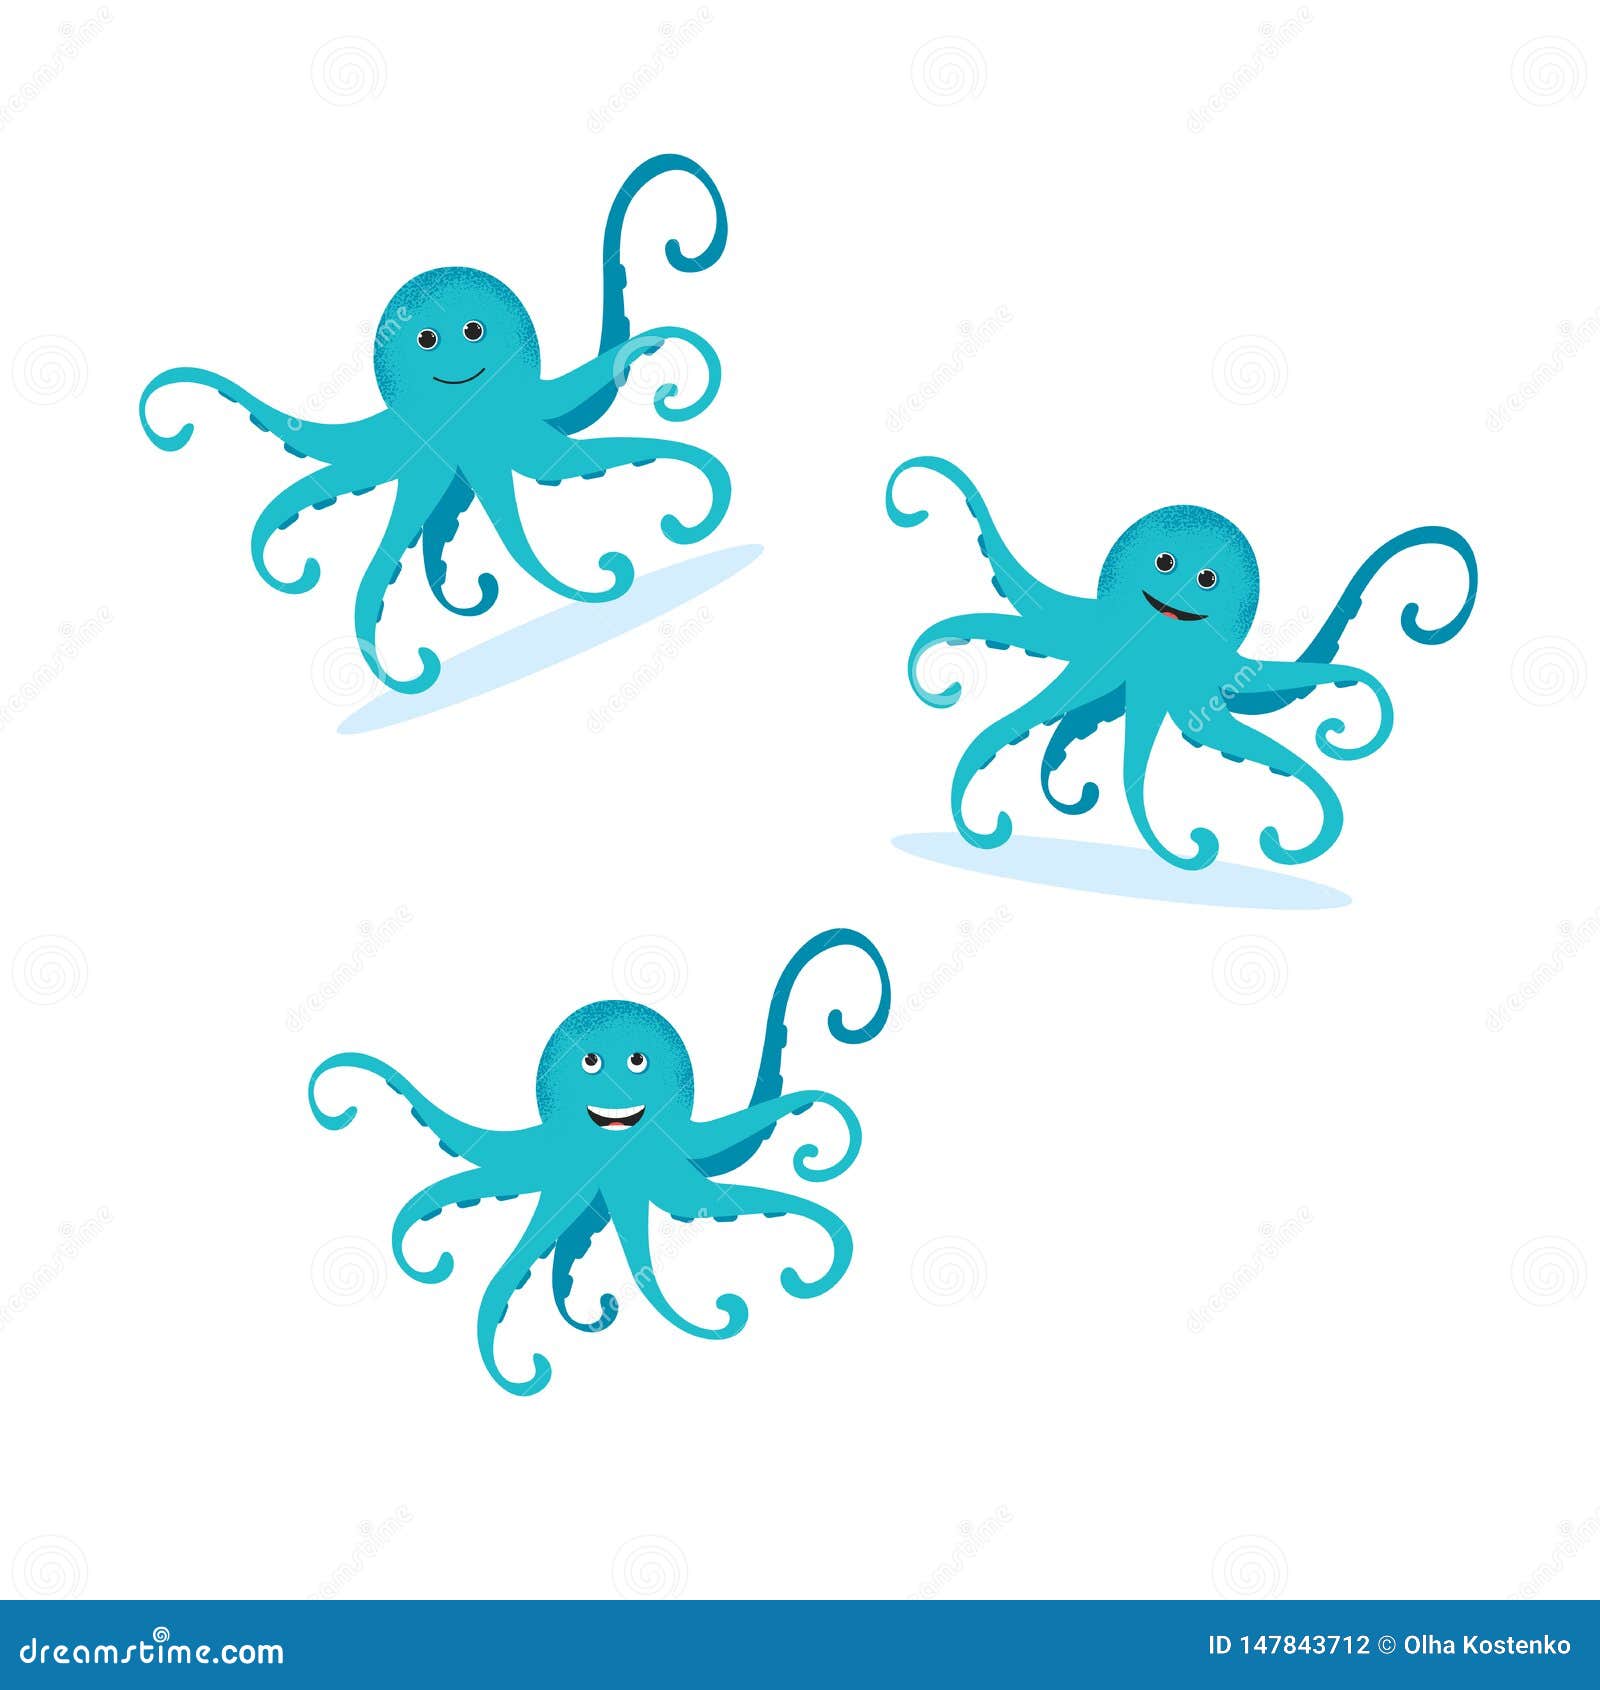 Cute Cartoon Blue Octopus Drawing Stock Vector - Illustration of colorful,  animal: 147843712